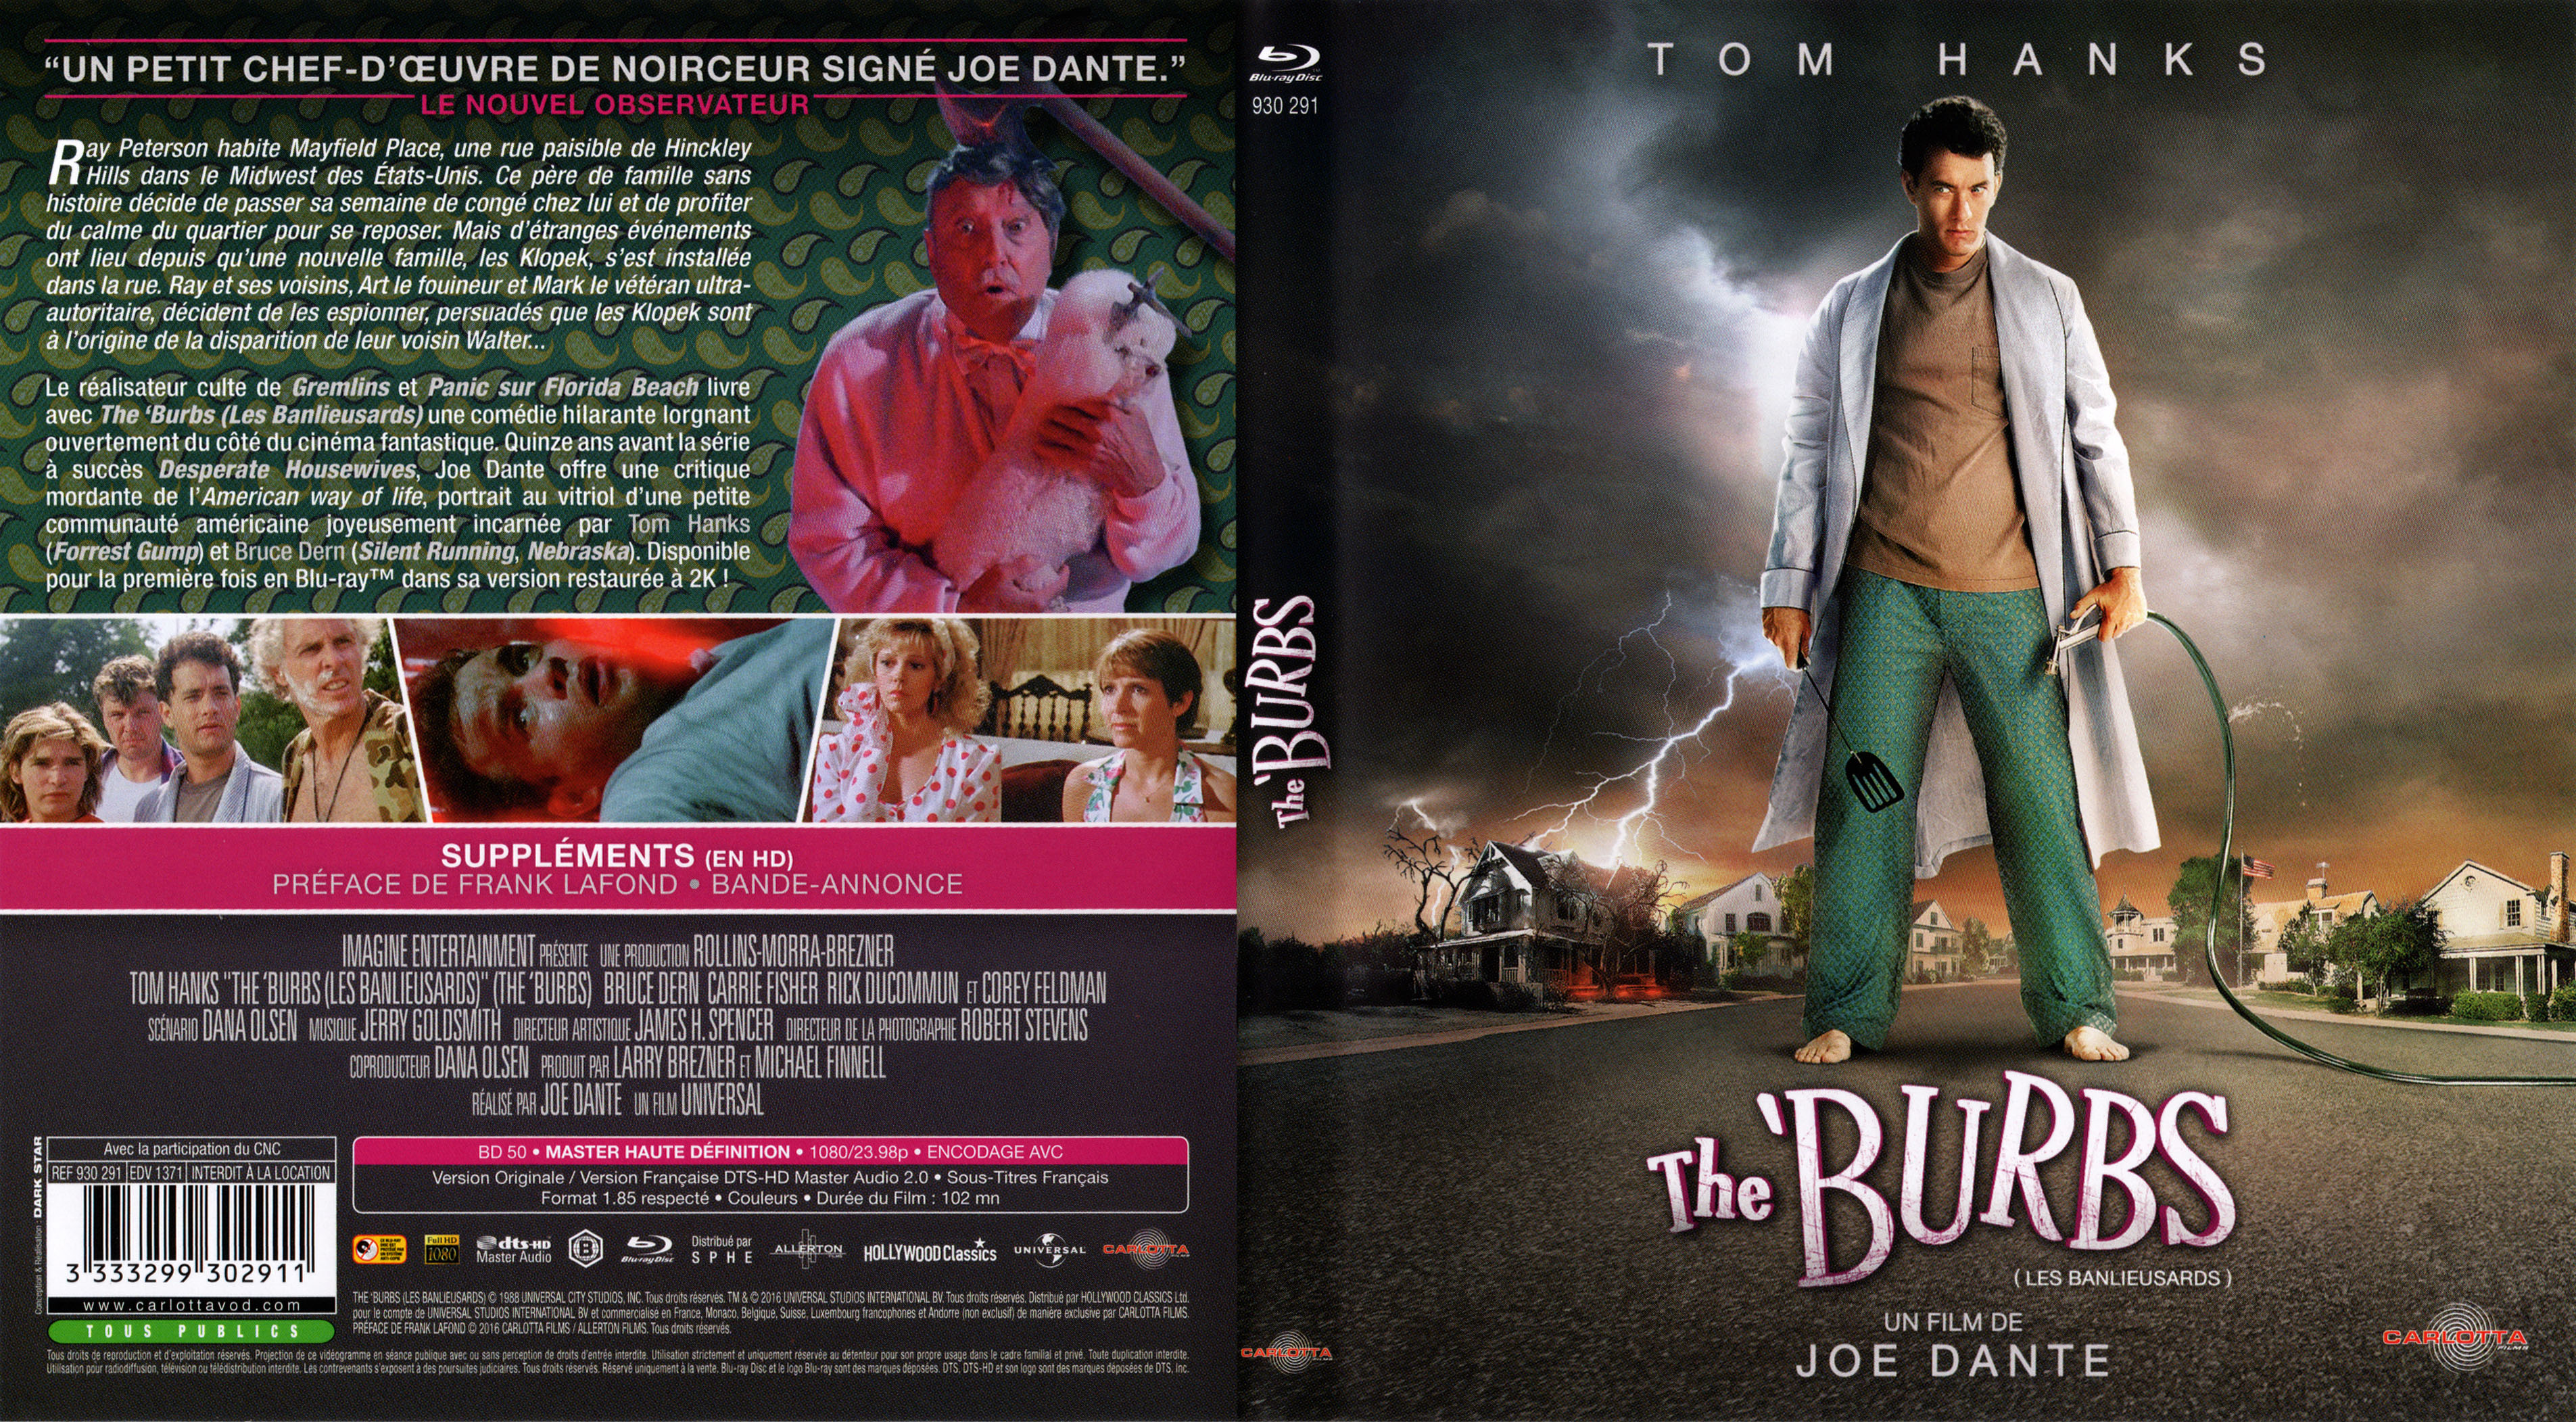 Jaquette DVD Les banlieusards - The Burbs (BLU-RAY)